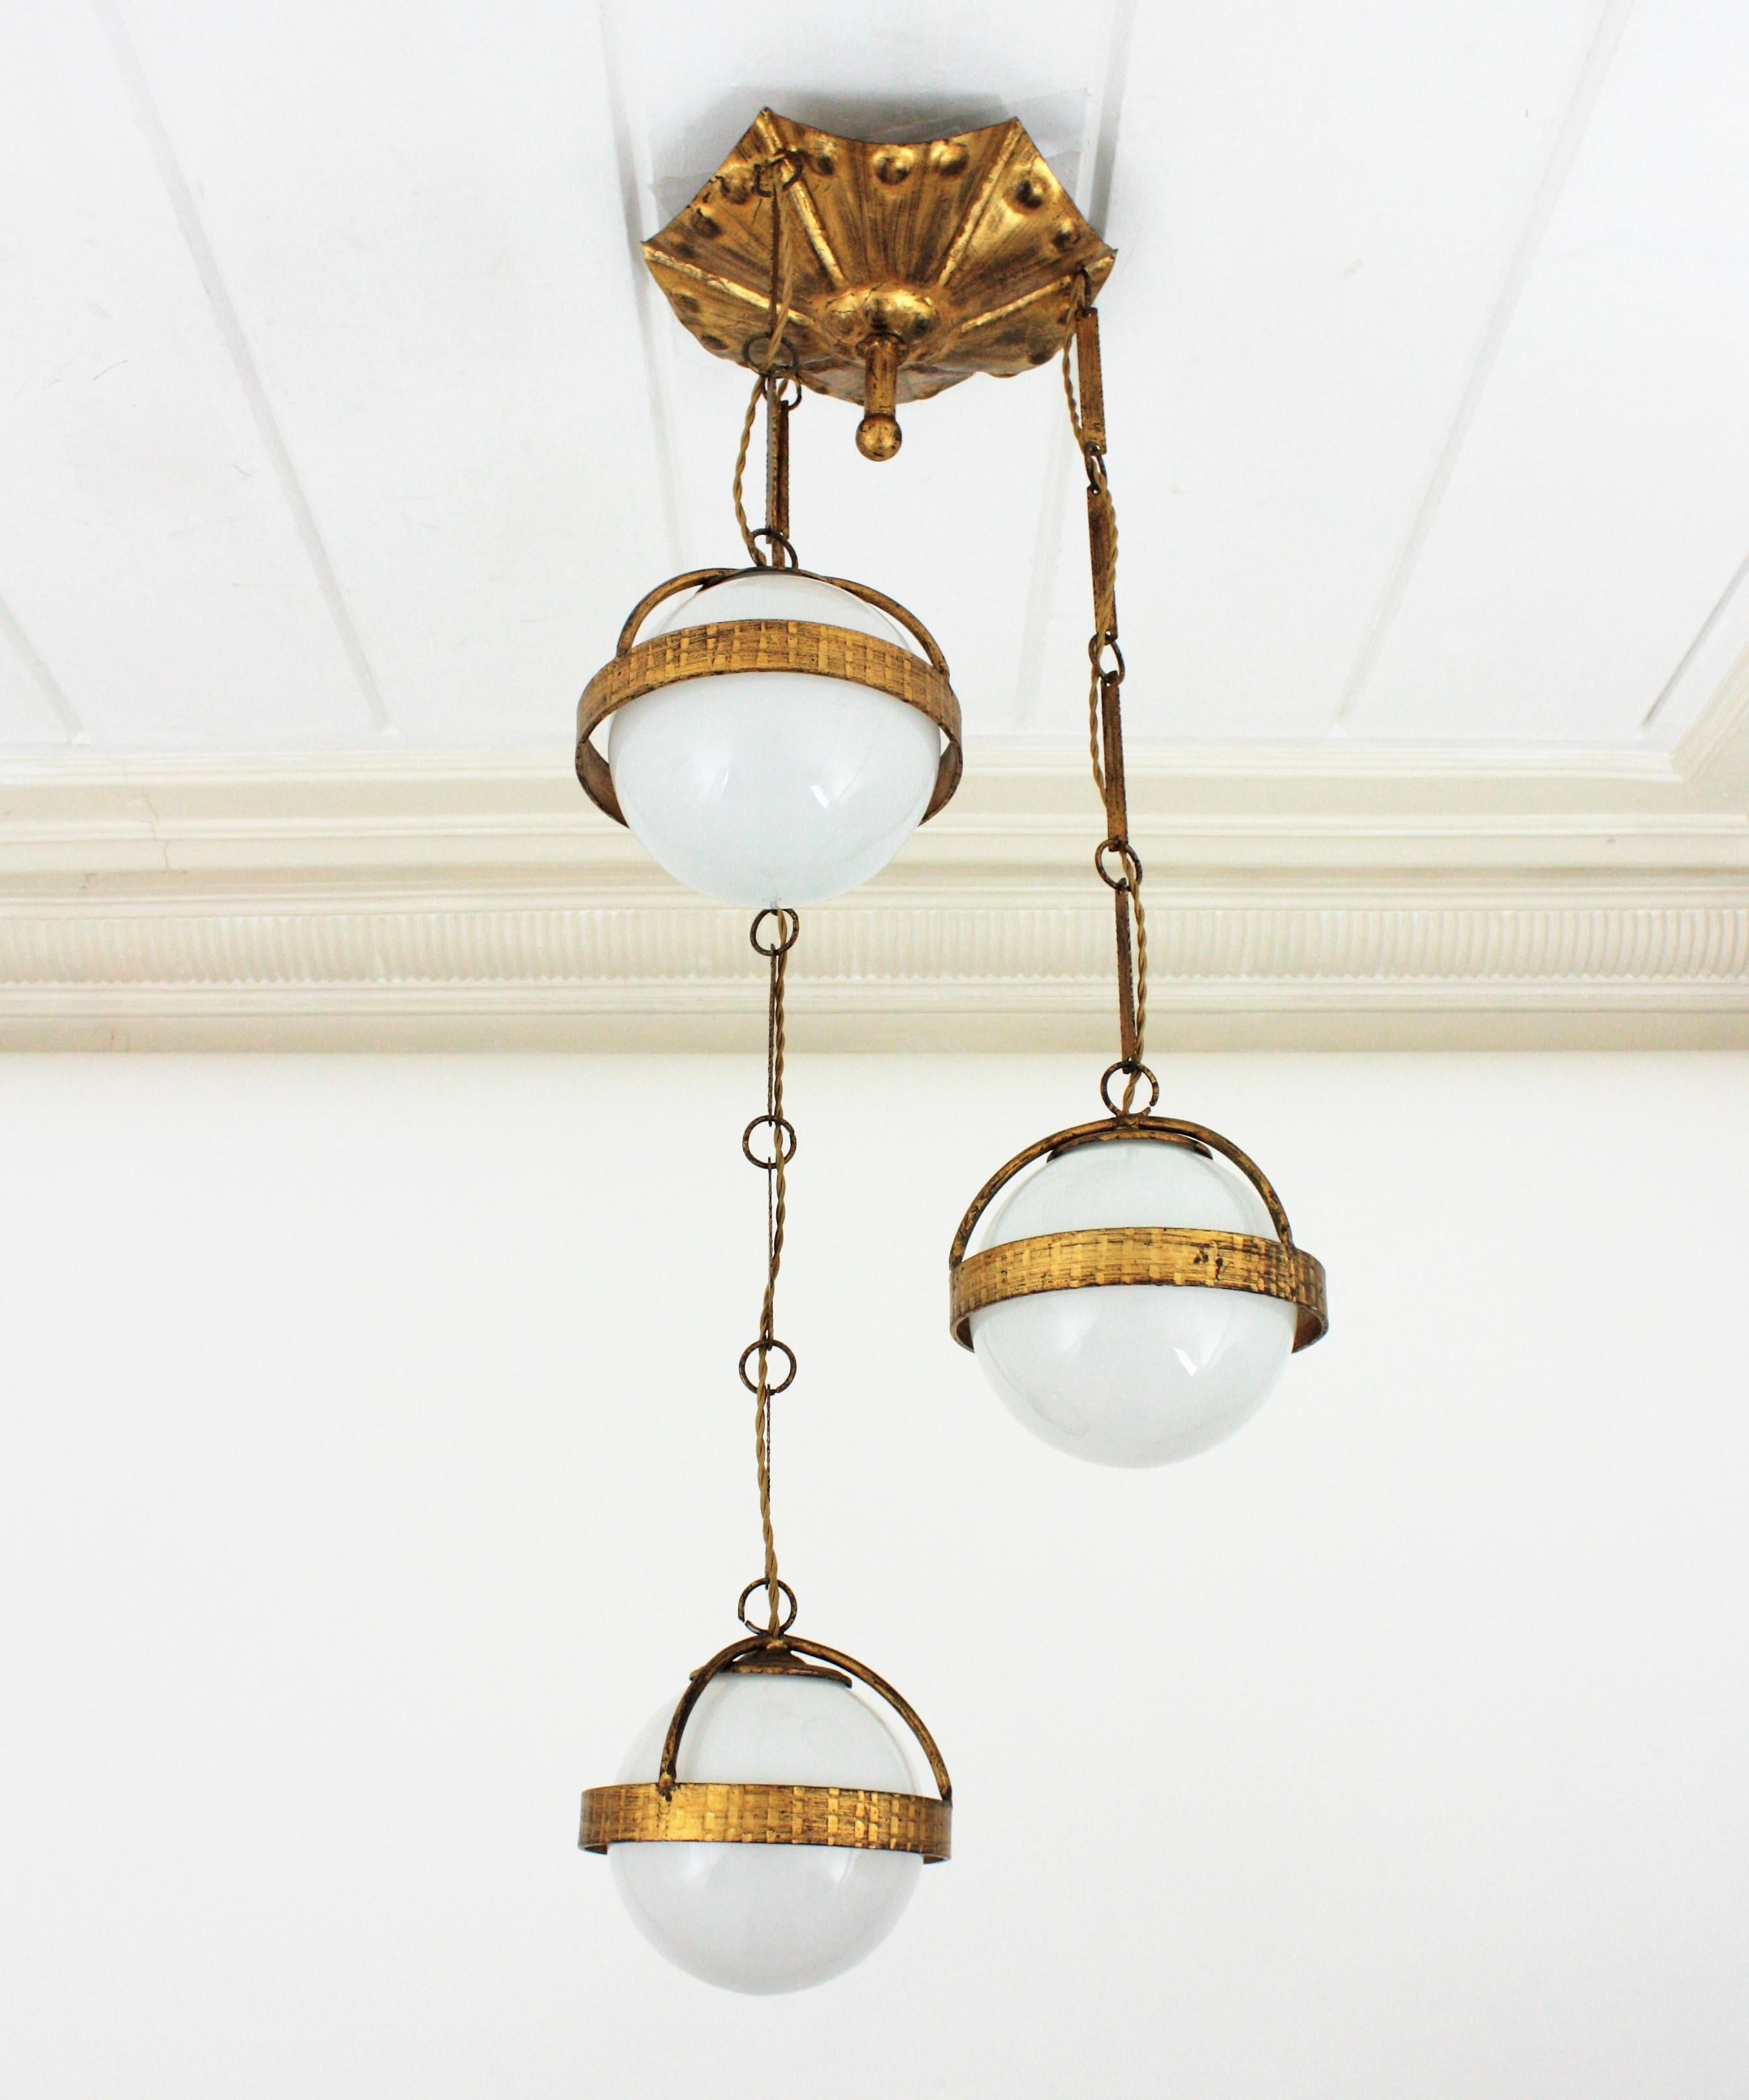 Spanish Cascade Chandelier / Pendant in Gilt Wrought Iron with Glass Globes 1